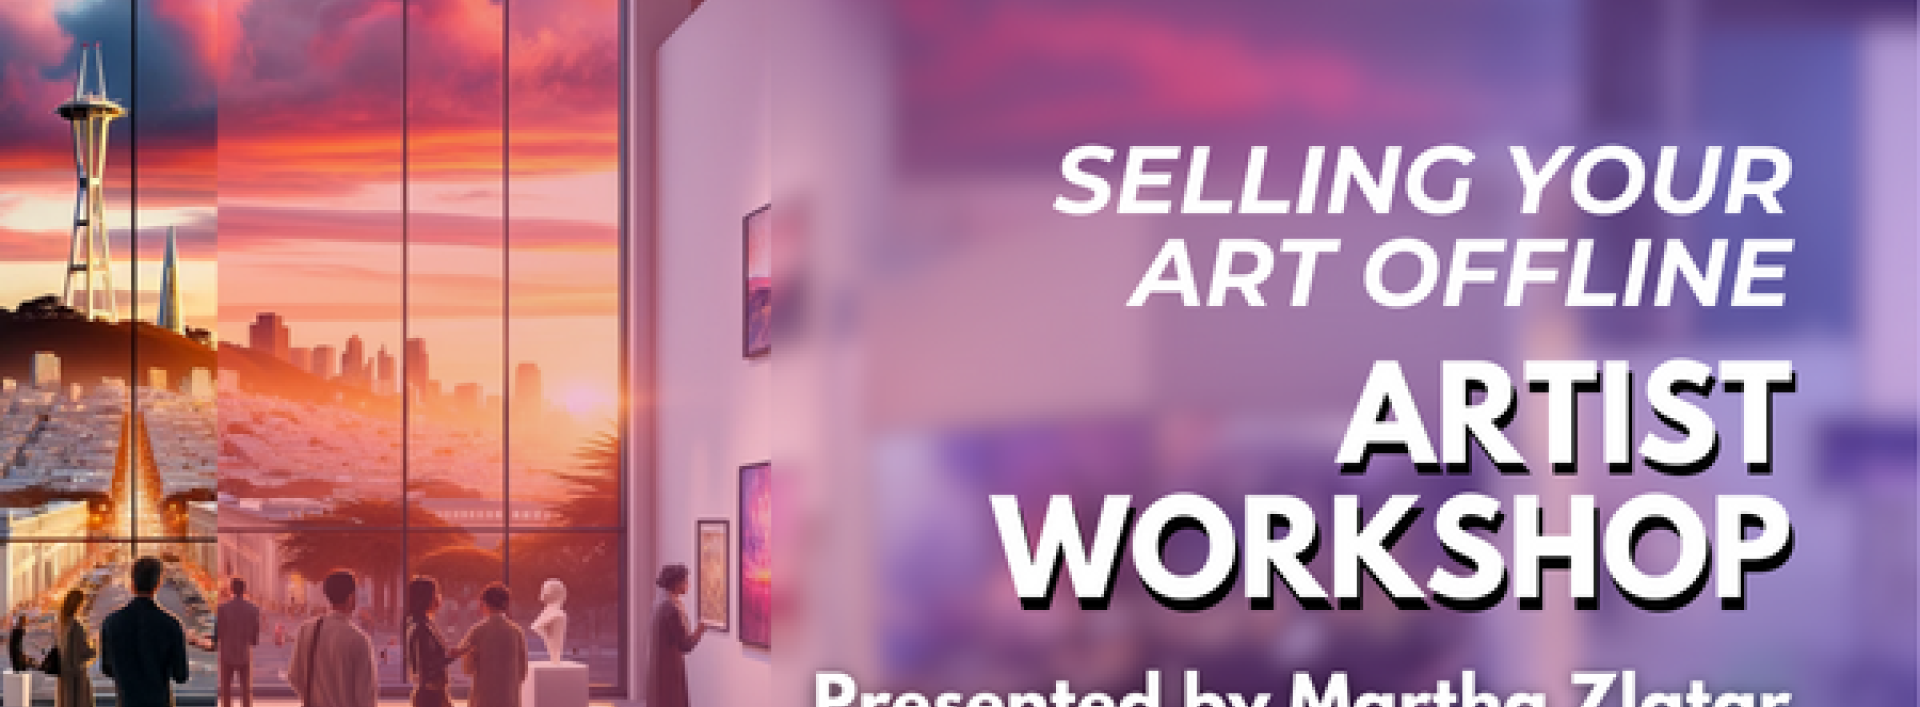 event graphic for the Selling Your Work artist workshop